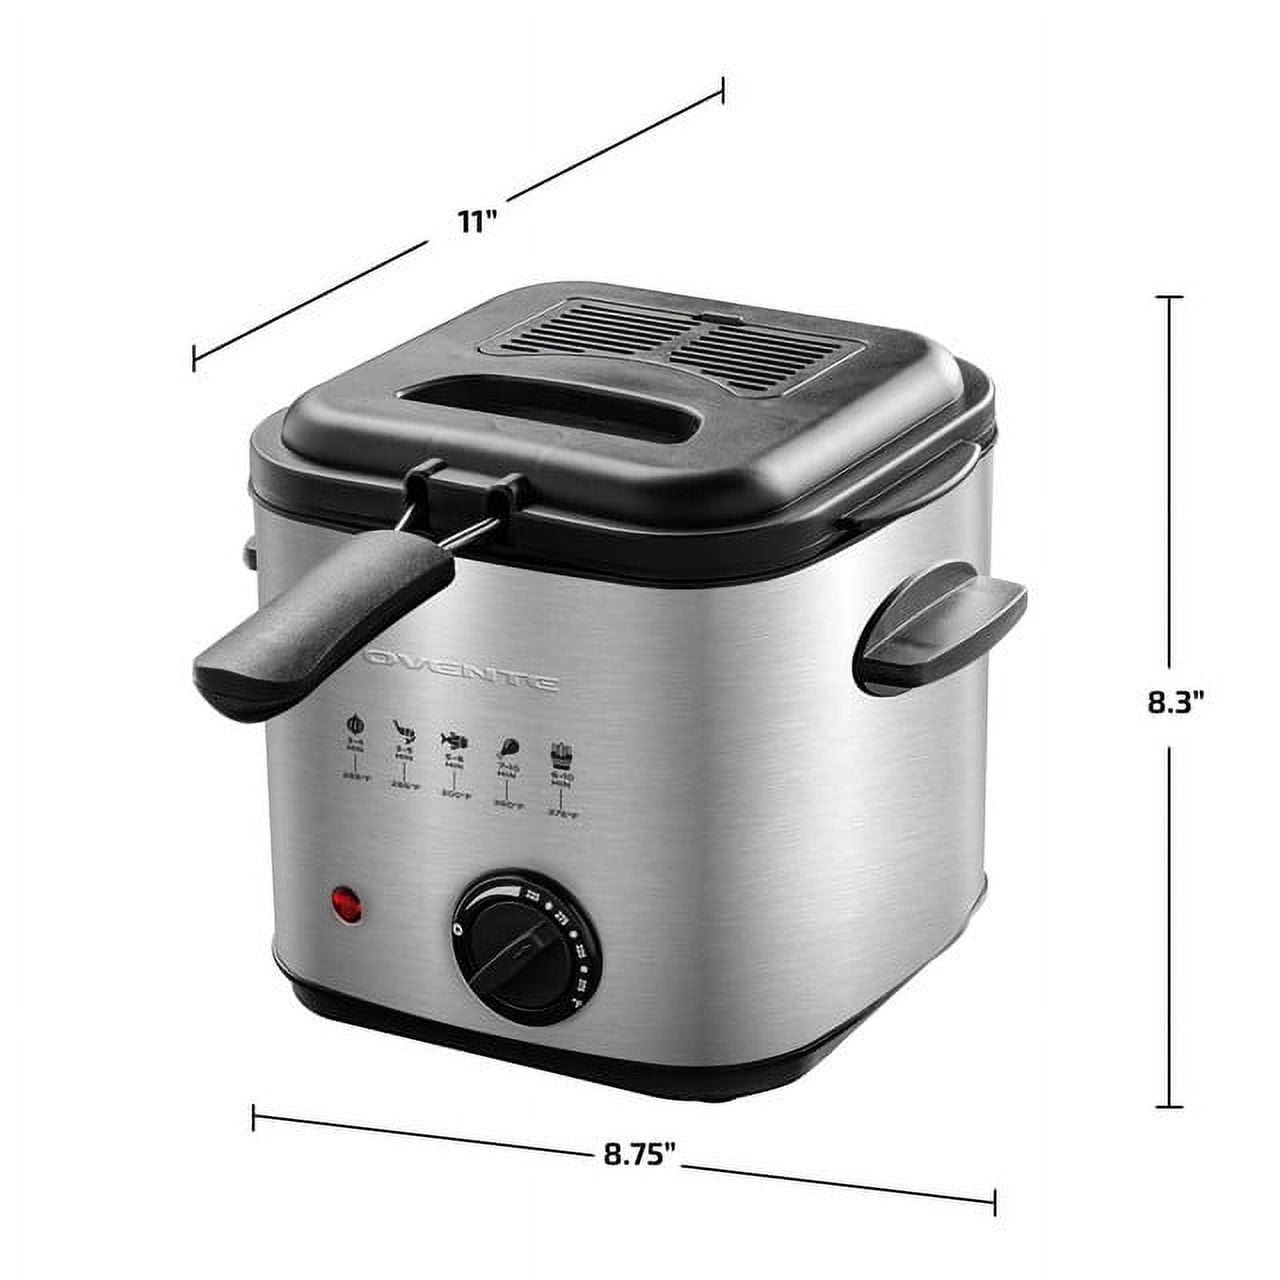 Winado 8.5-Quart Stainless Steel Deep Fryer with Faucet, Removable Basket  & Heating Element, Temperature Controls